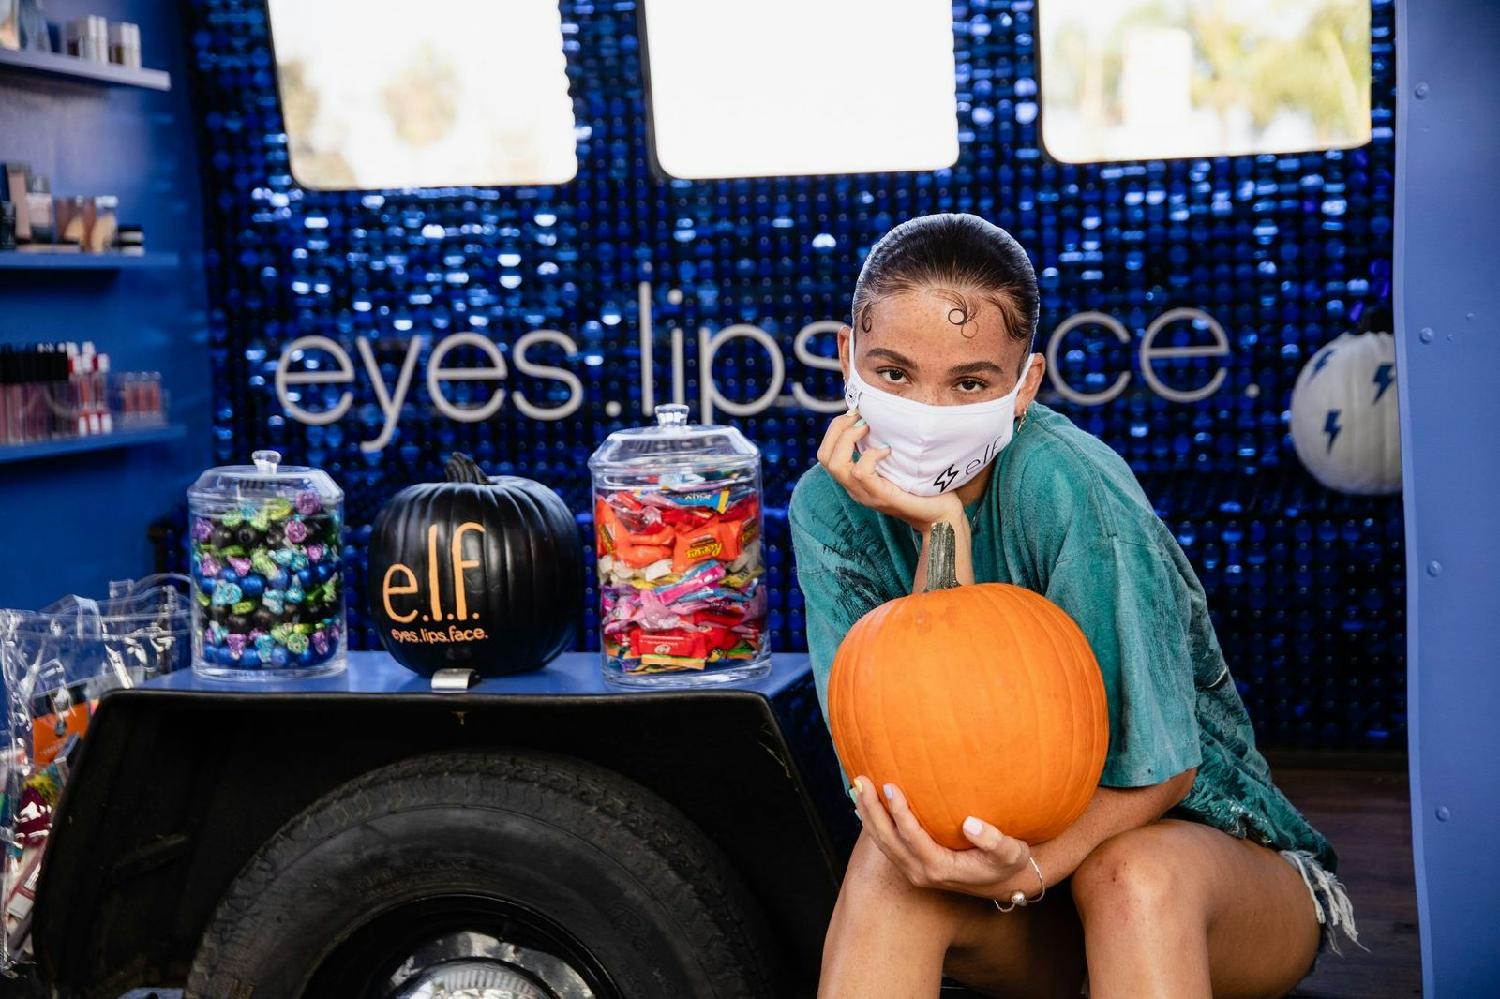 Due to the pandemic, e.l.f. put a new twist on its Halloween celebrations bringing the best of the spooky holiday straight to influencers’ homes with the e.l.f. Halloween VW bus for a safe, personal pop-up experience that provided an element of surprise at their doorstep.

 